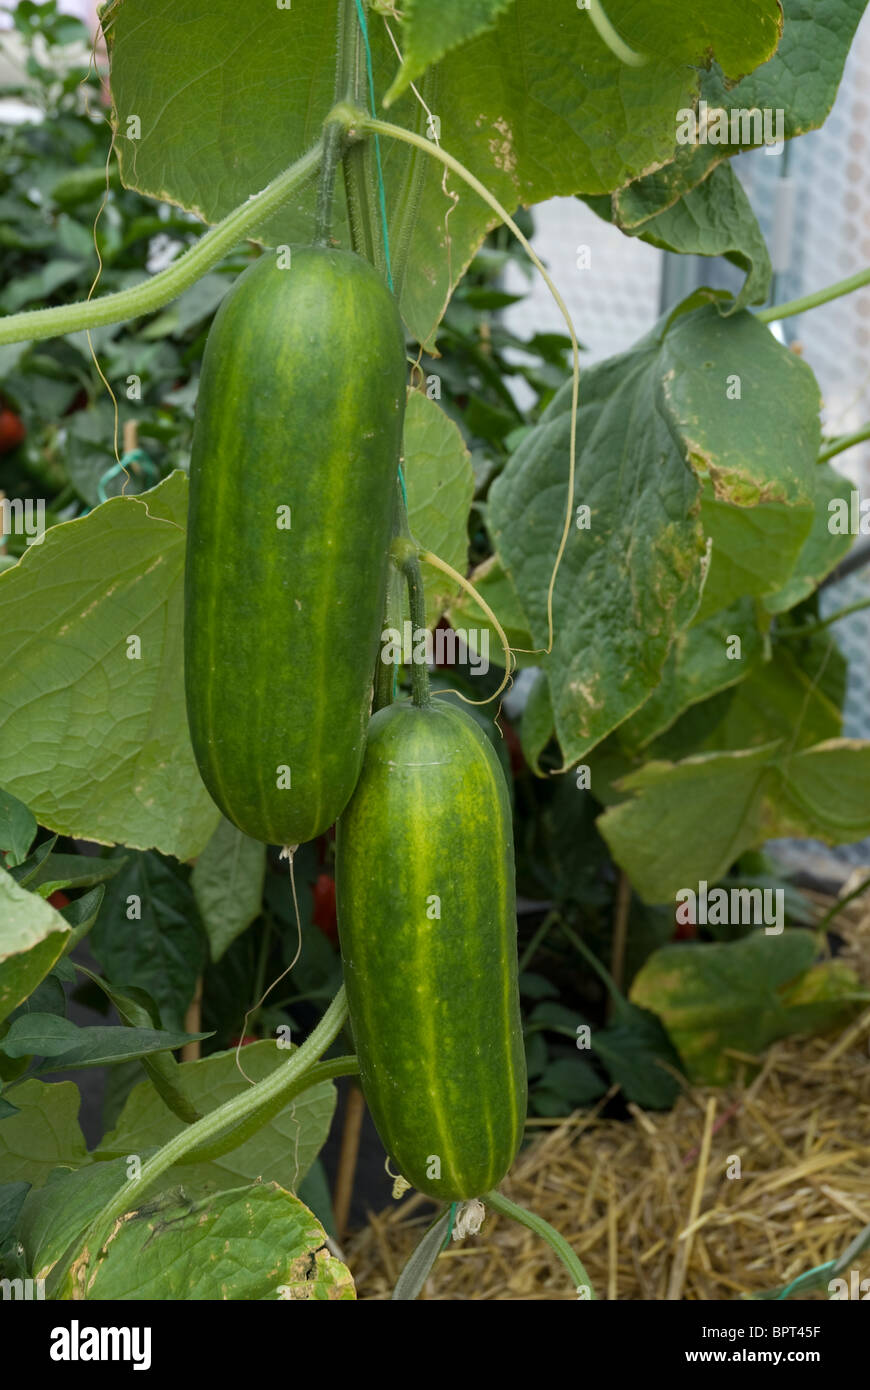 Marrow growing in a greenhouse at the Hampton Court Flower Show England UK Stock Photo